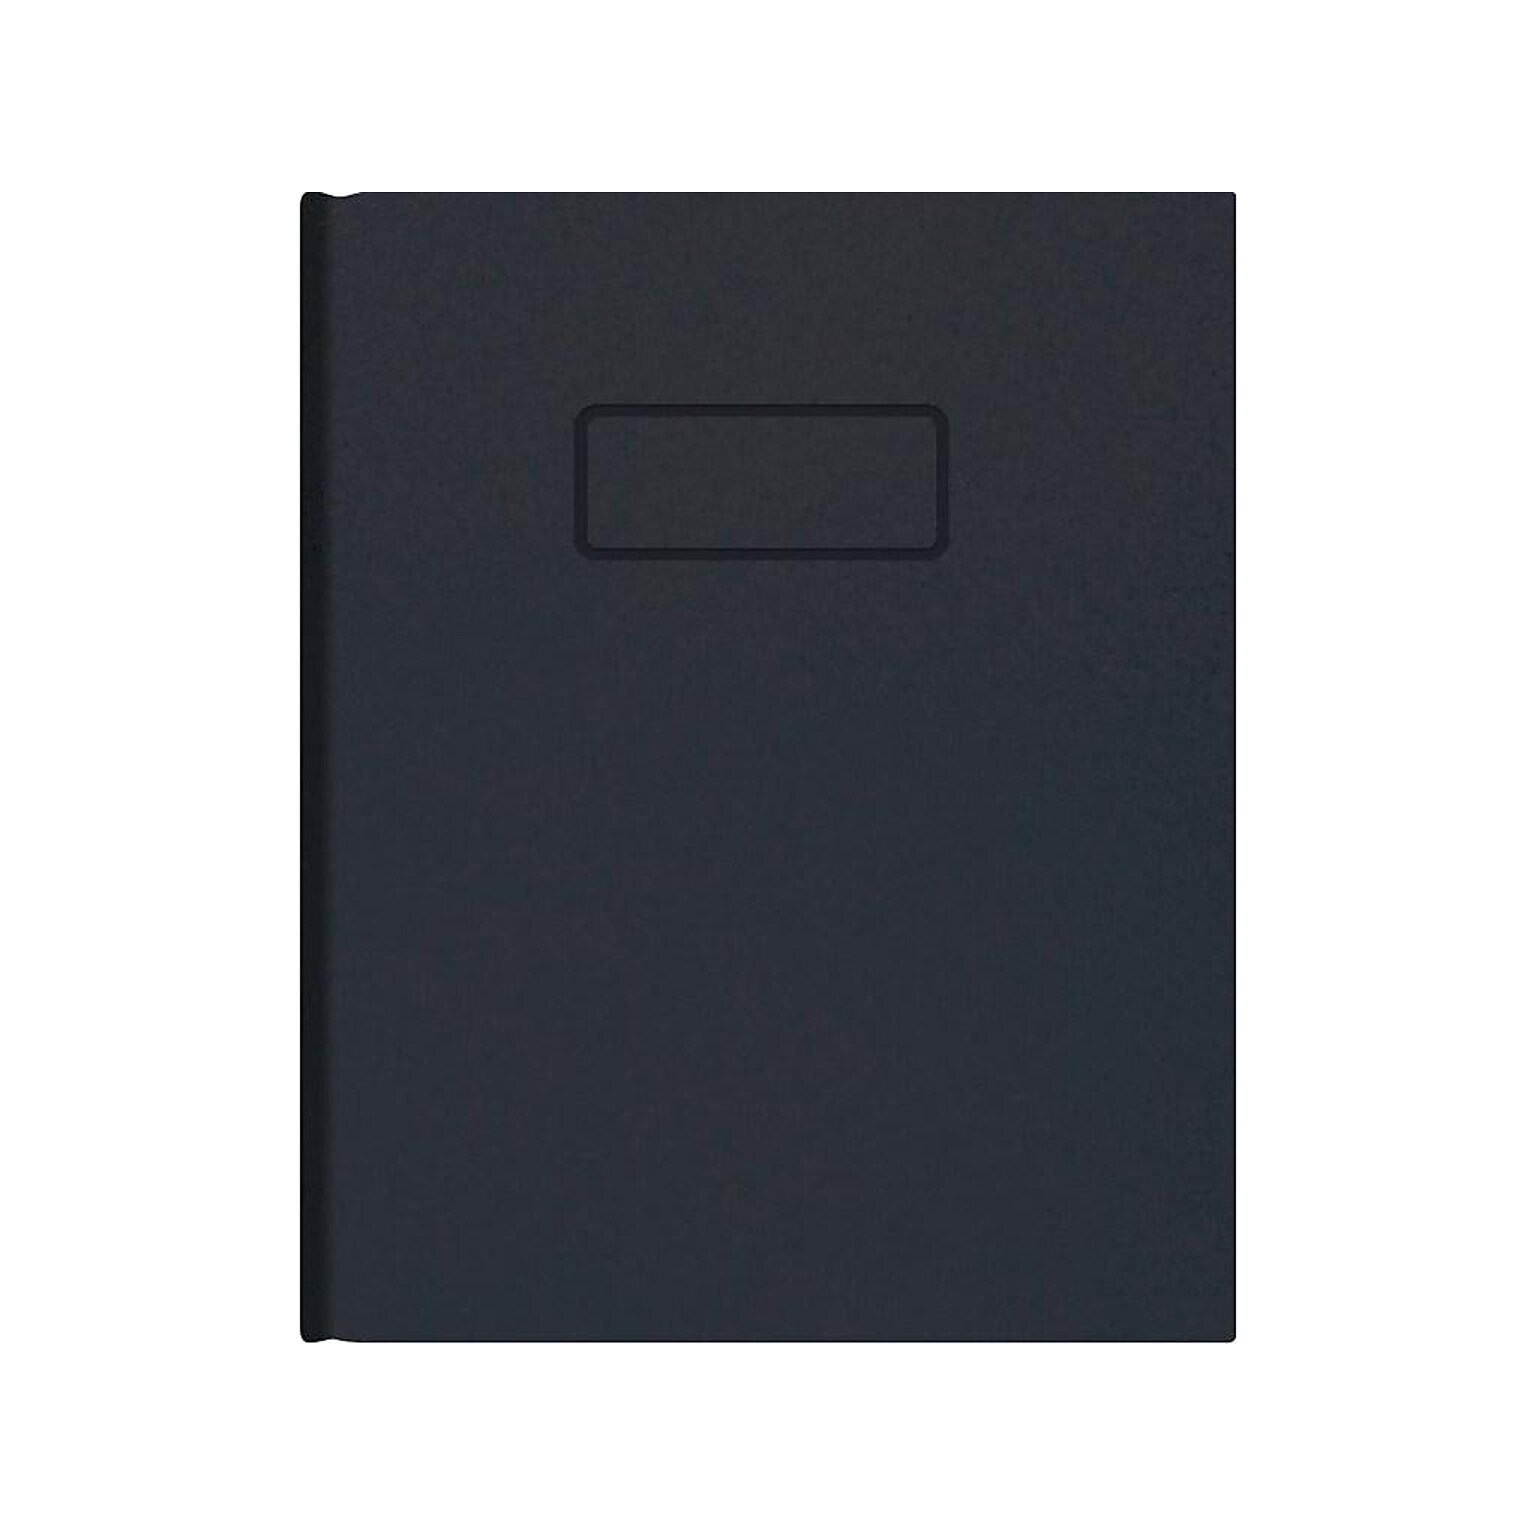 Blueline Professional Notebooks, 7.25 x 9.25, College Ruled, 96 Sheets, Black (A9)